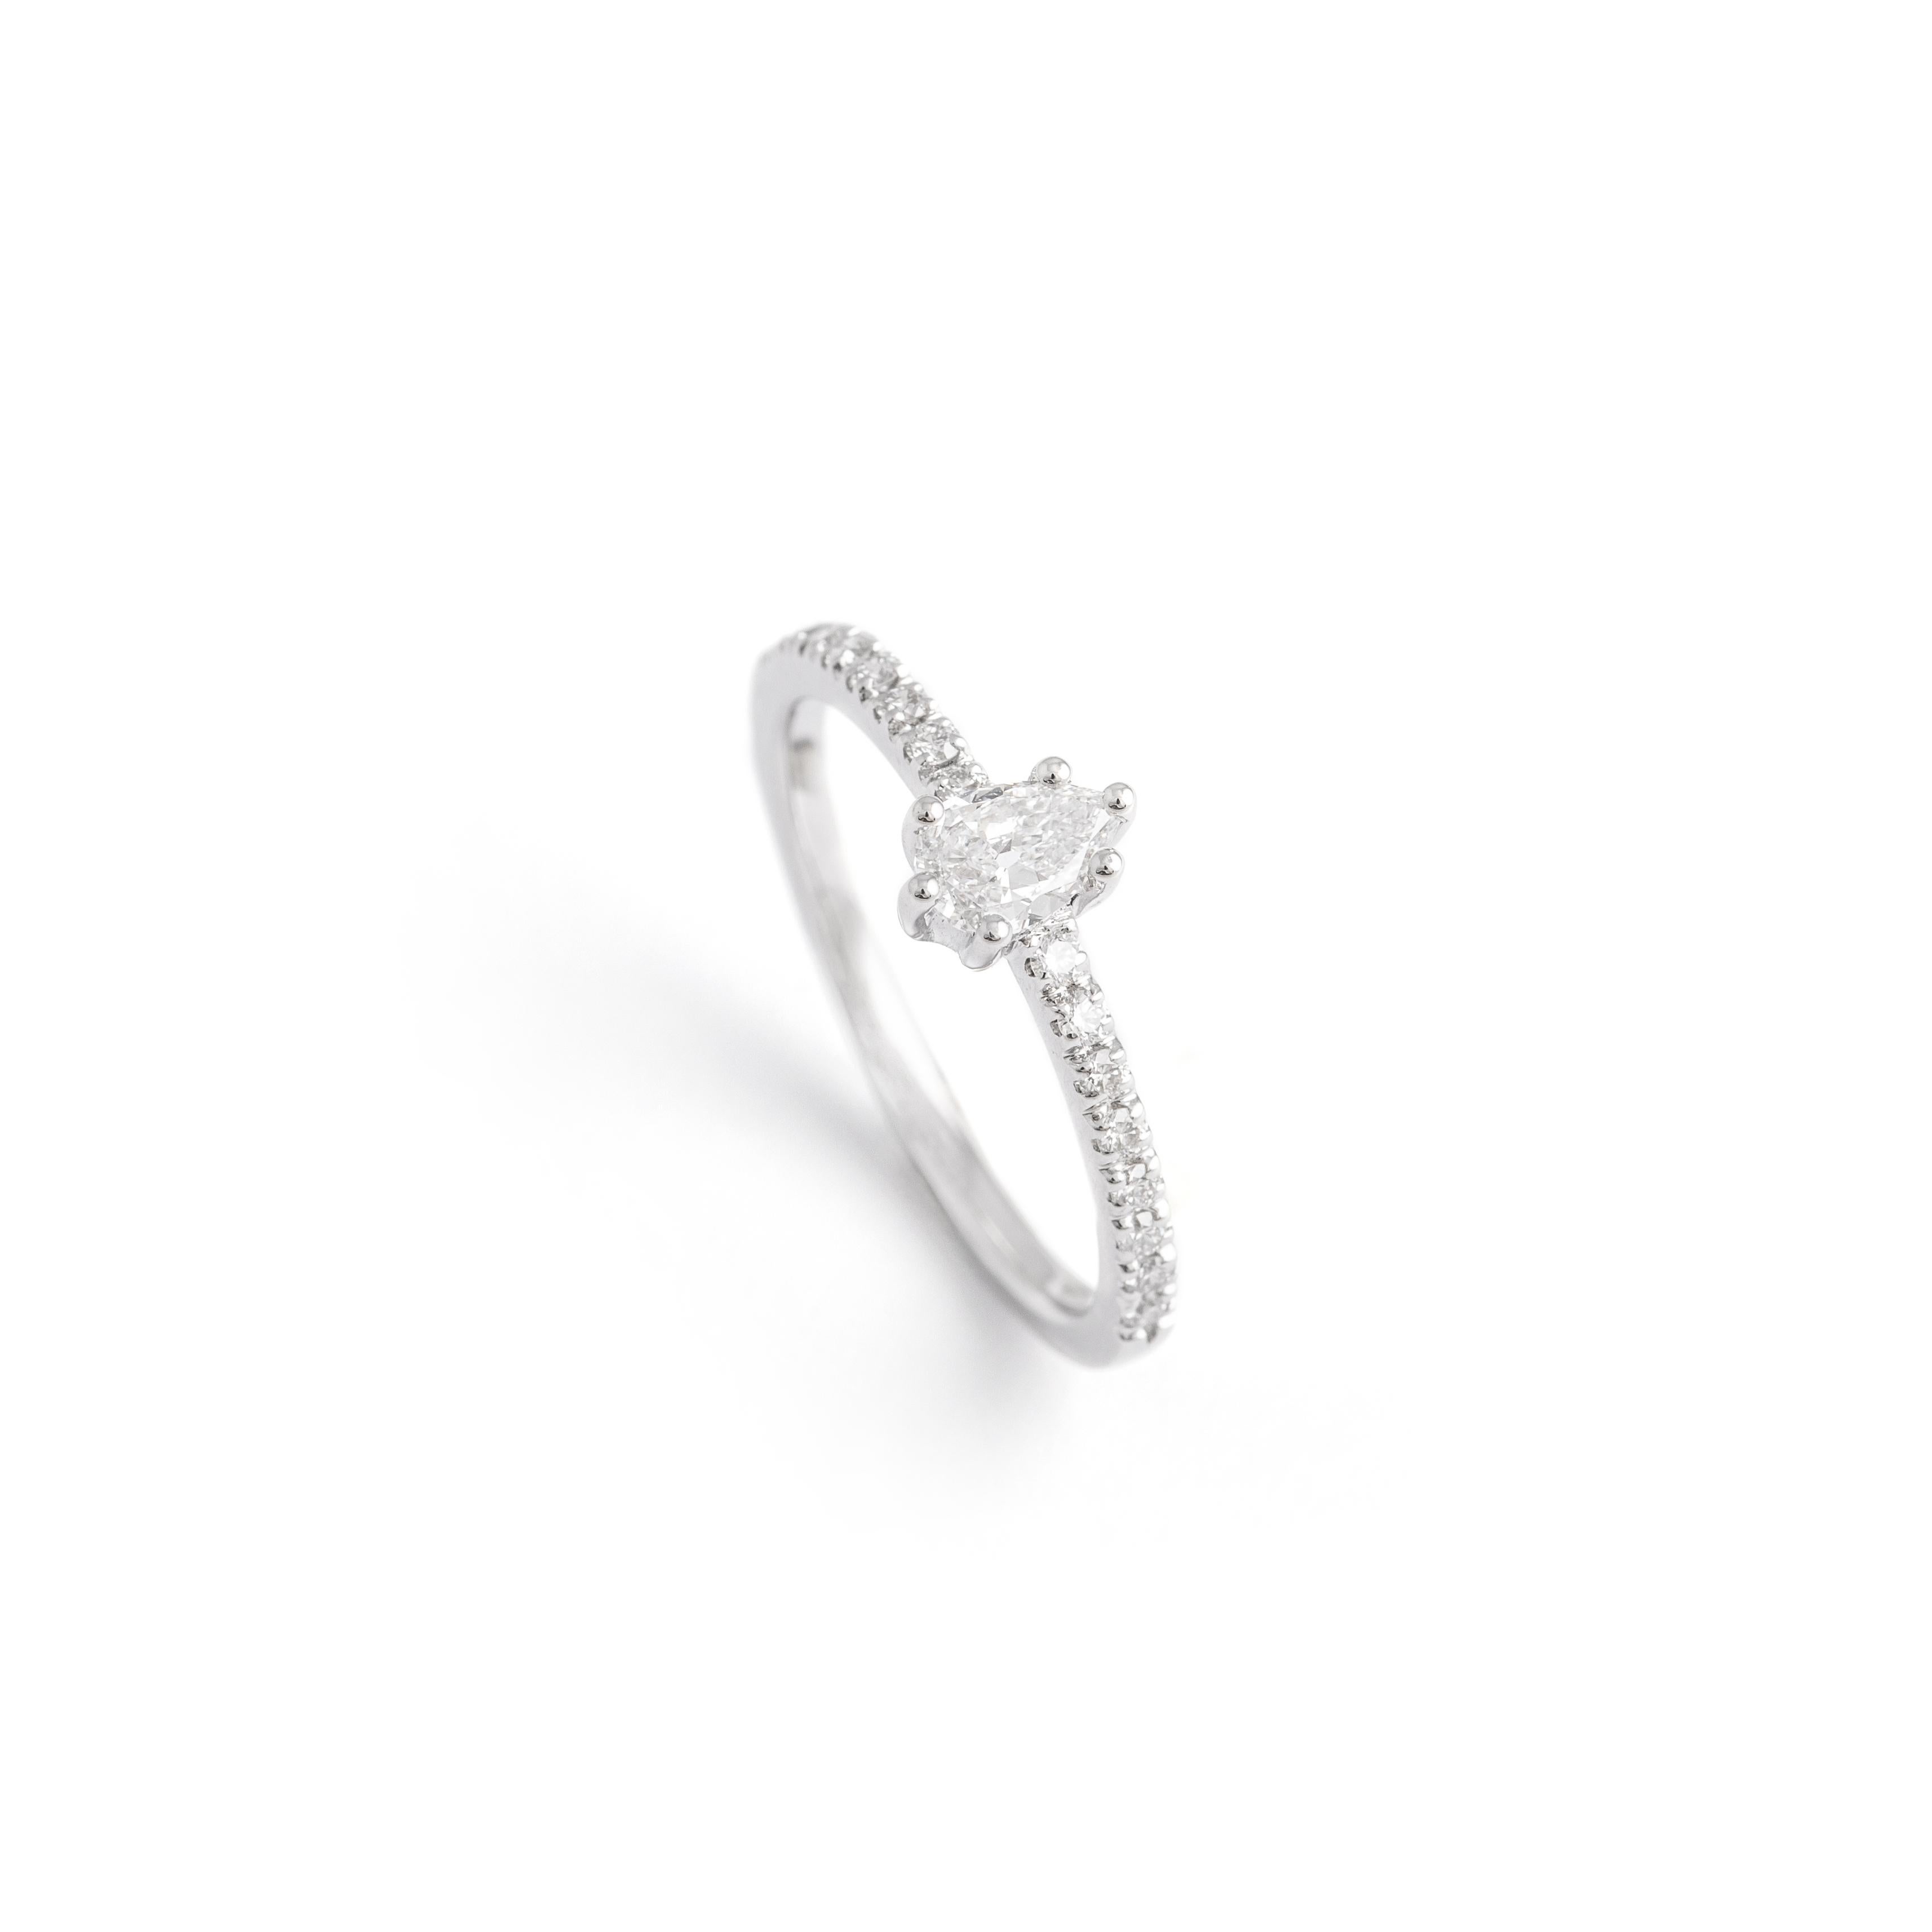 0.295 Carat Diamond Solitaire Ring For Sale 1